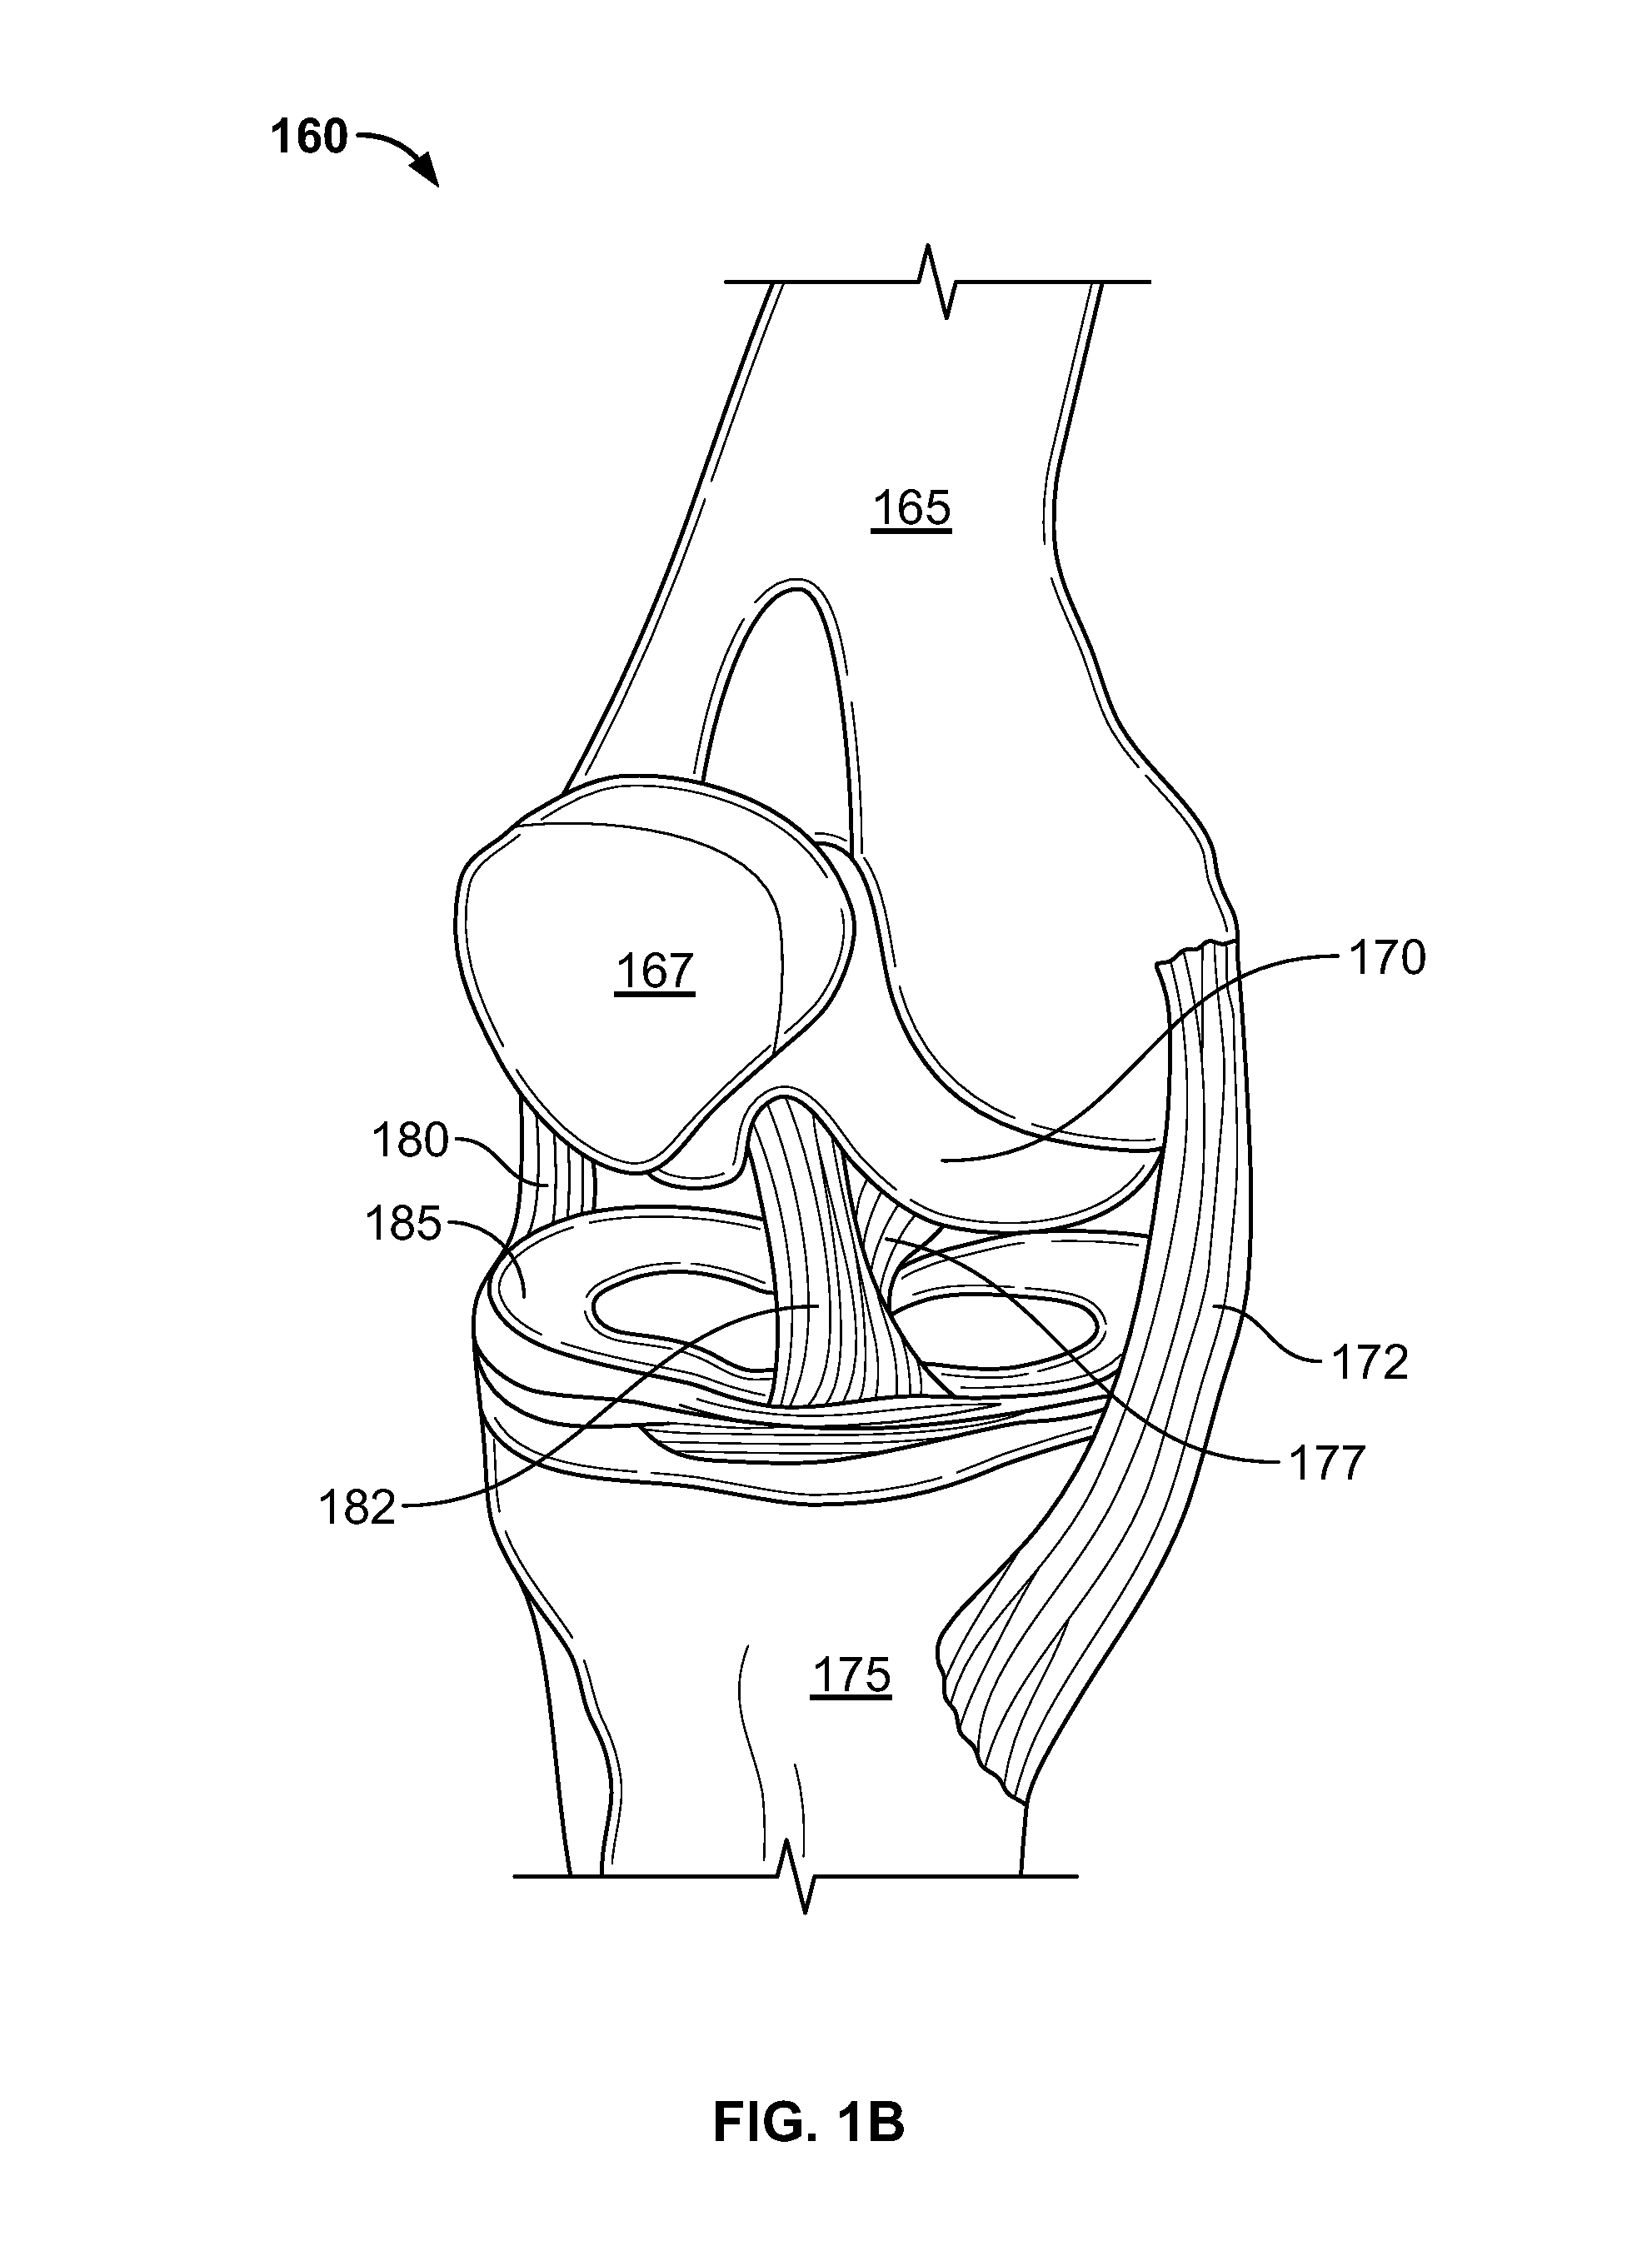 Systems and methods for treating human joints